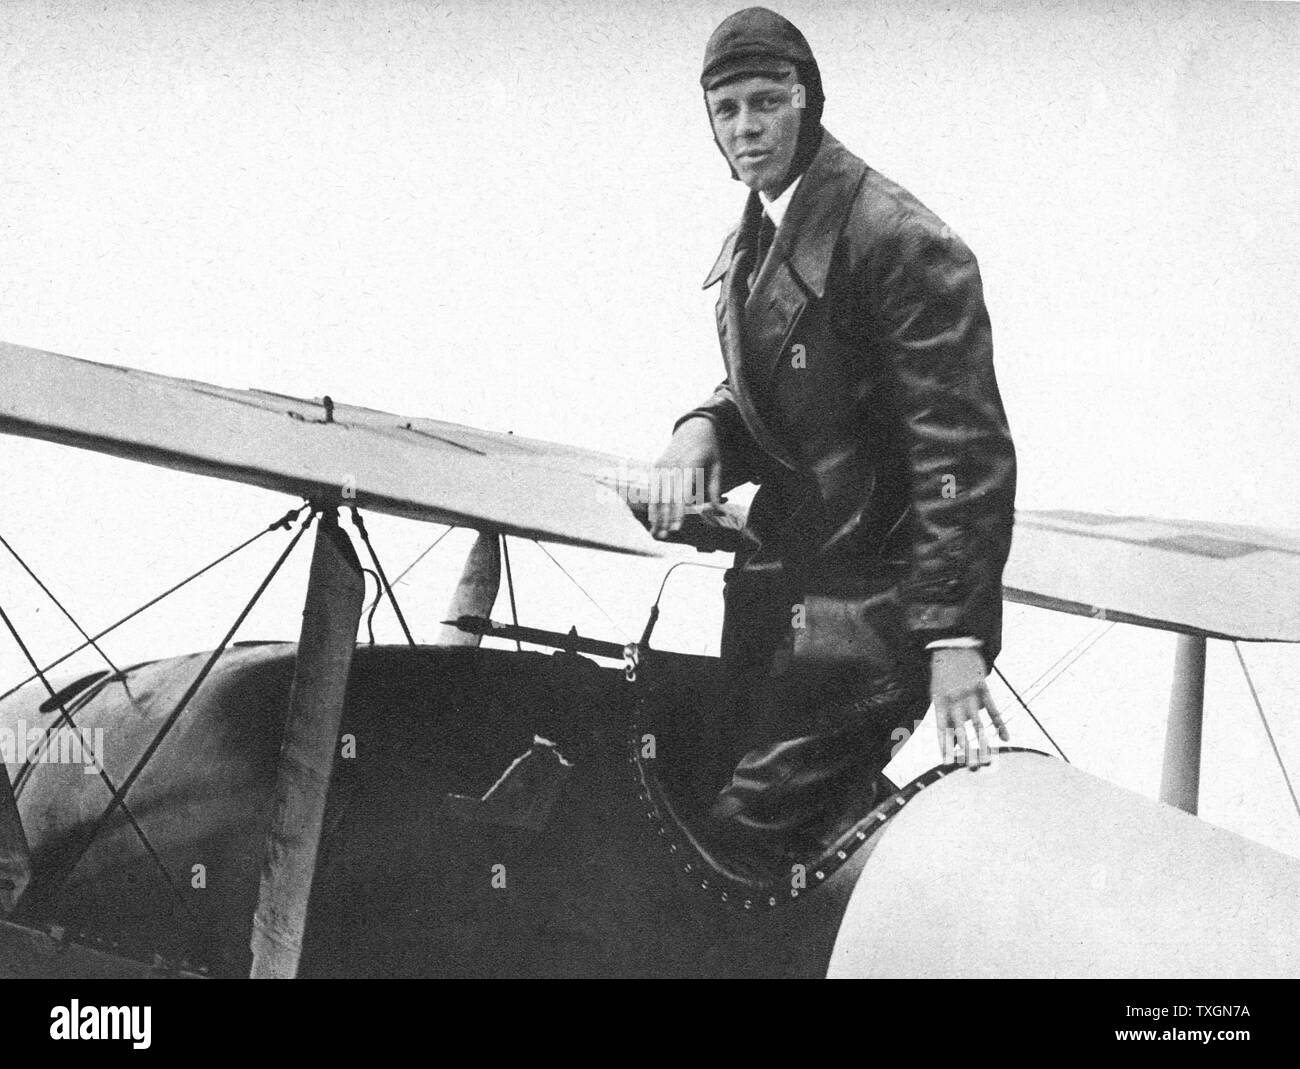 Charles Lindbergh (1902-1974) in his flying kit standing by 'Spirit of St Louis', the plane in which he made the first non-stop Atlantic air crossing: 20-21 May 1927. Landed at Le Bourget Airdrome, Paris, after a flight of 33.5 hours. Stock Photo